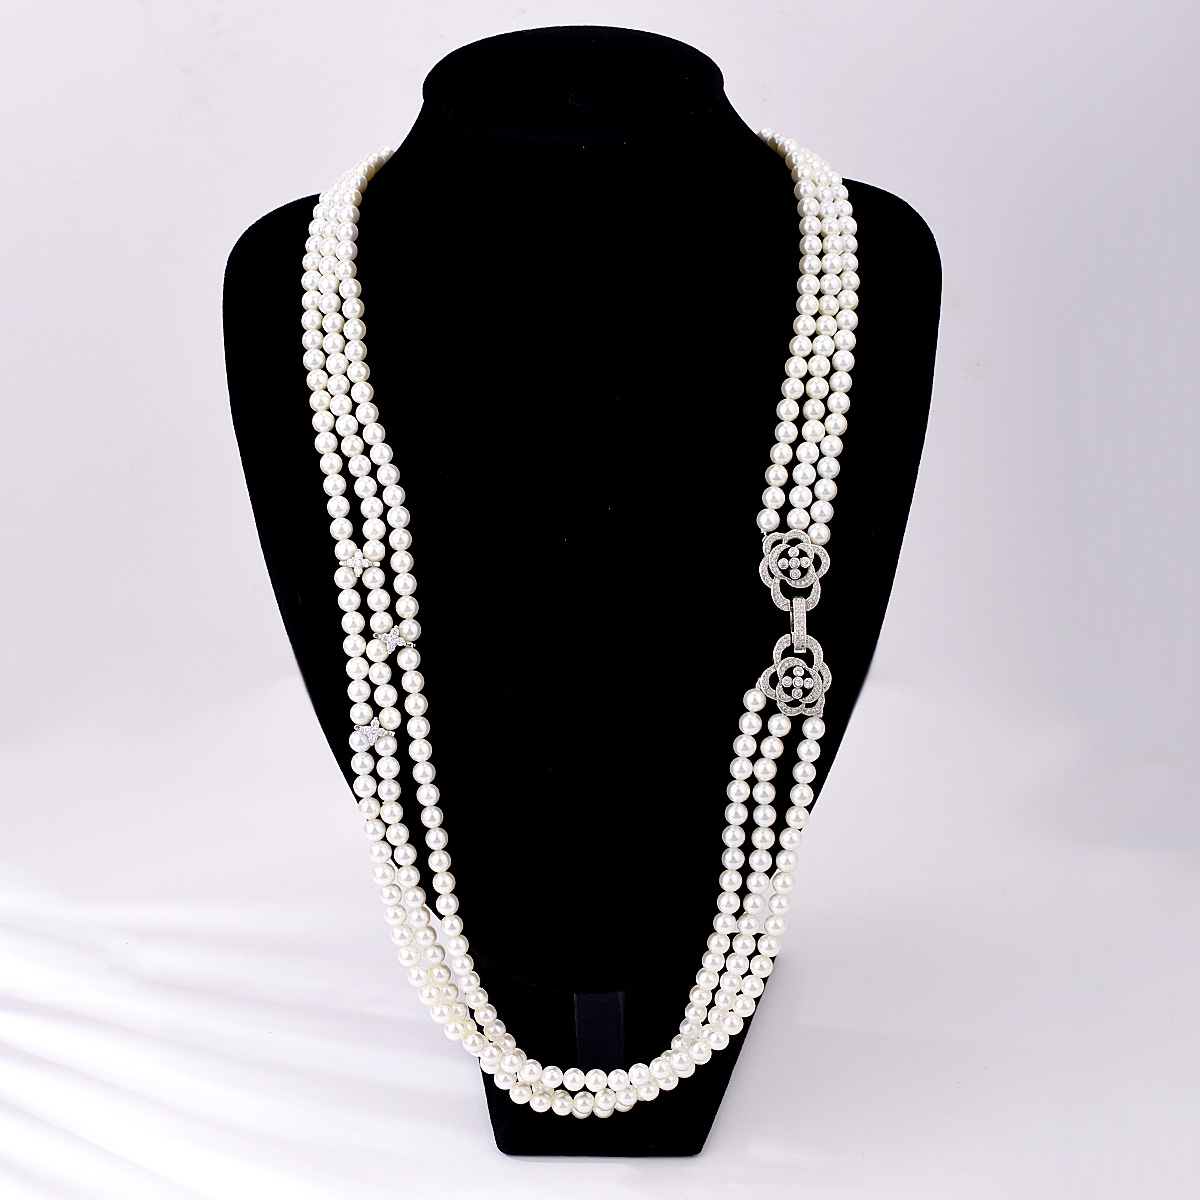 Inexpensive Platinum Plated White Long Chain Necklace of Original Design